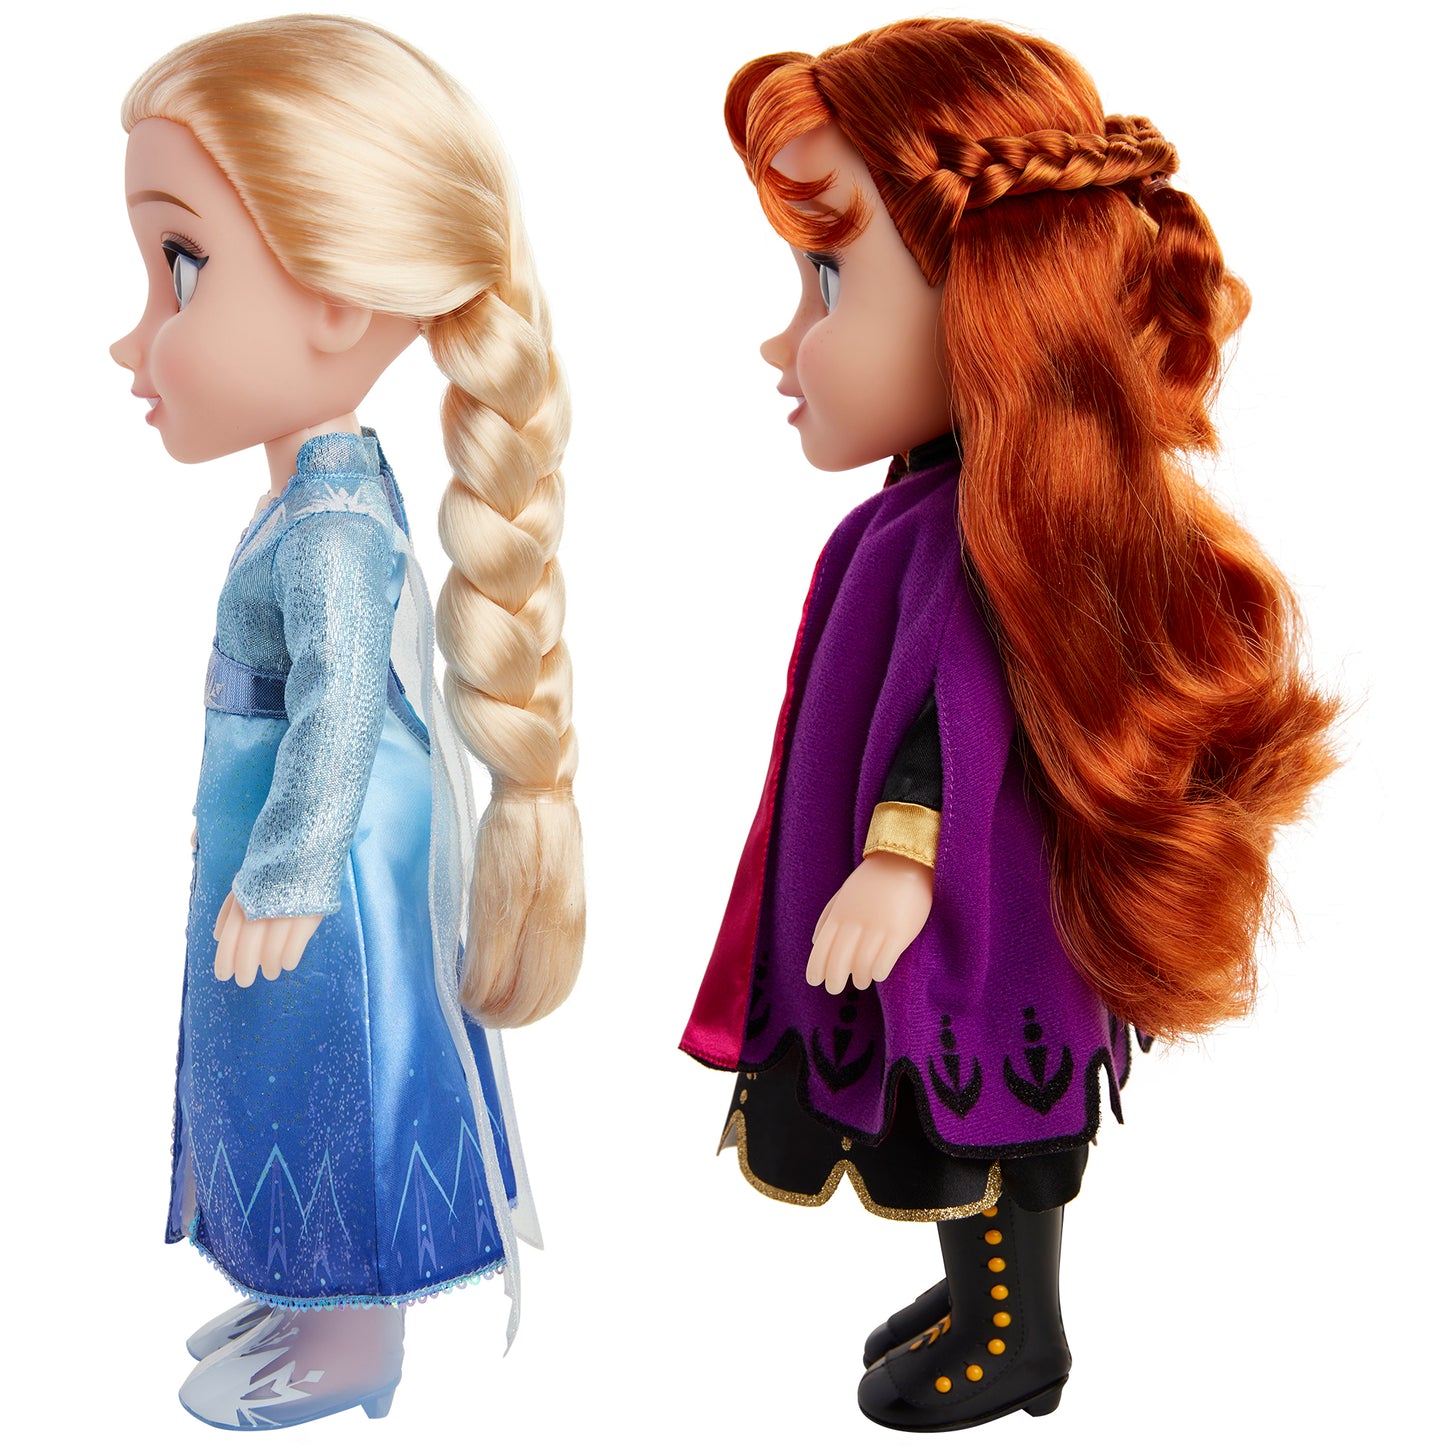 Disney Frozen 2 Singing Sisters Anna & Elsa Exclusive 14-Inch Doll 2-Pack [with Sound]